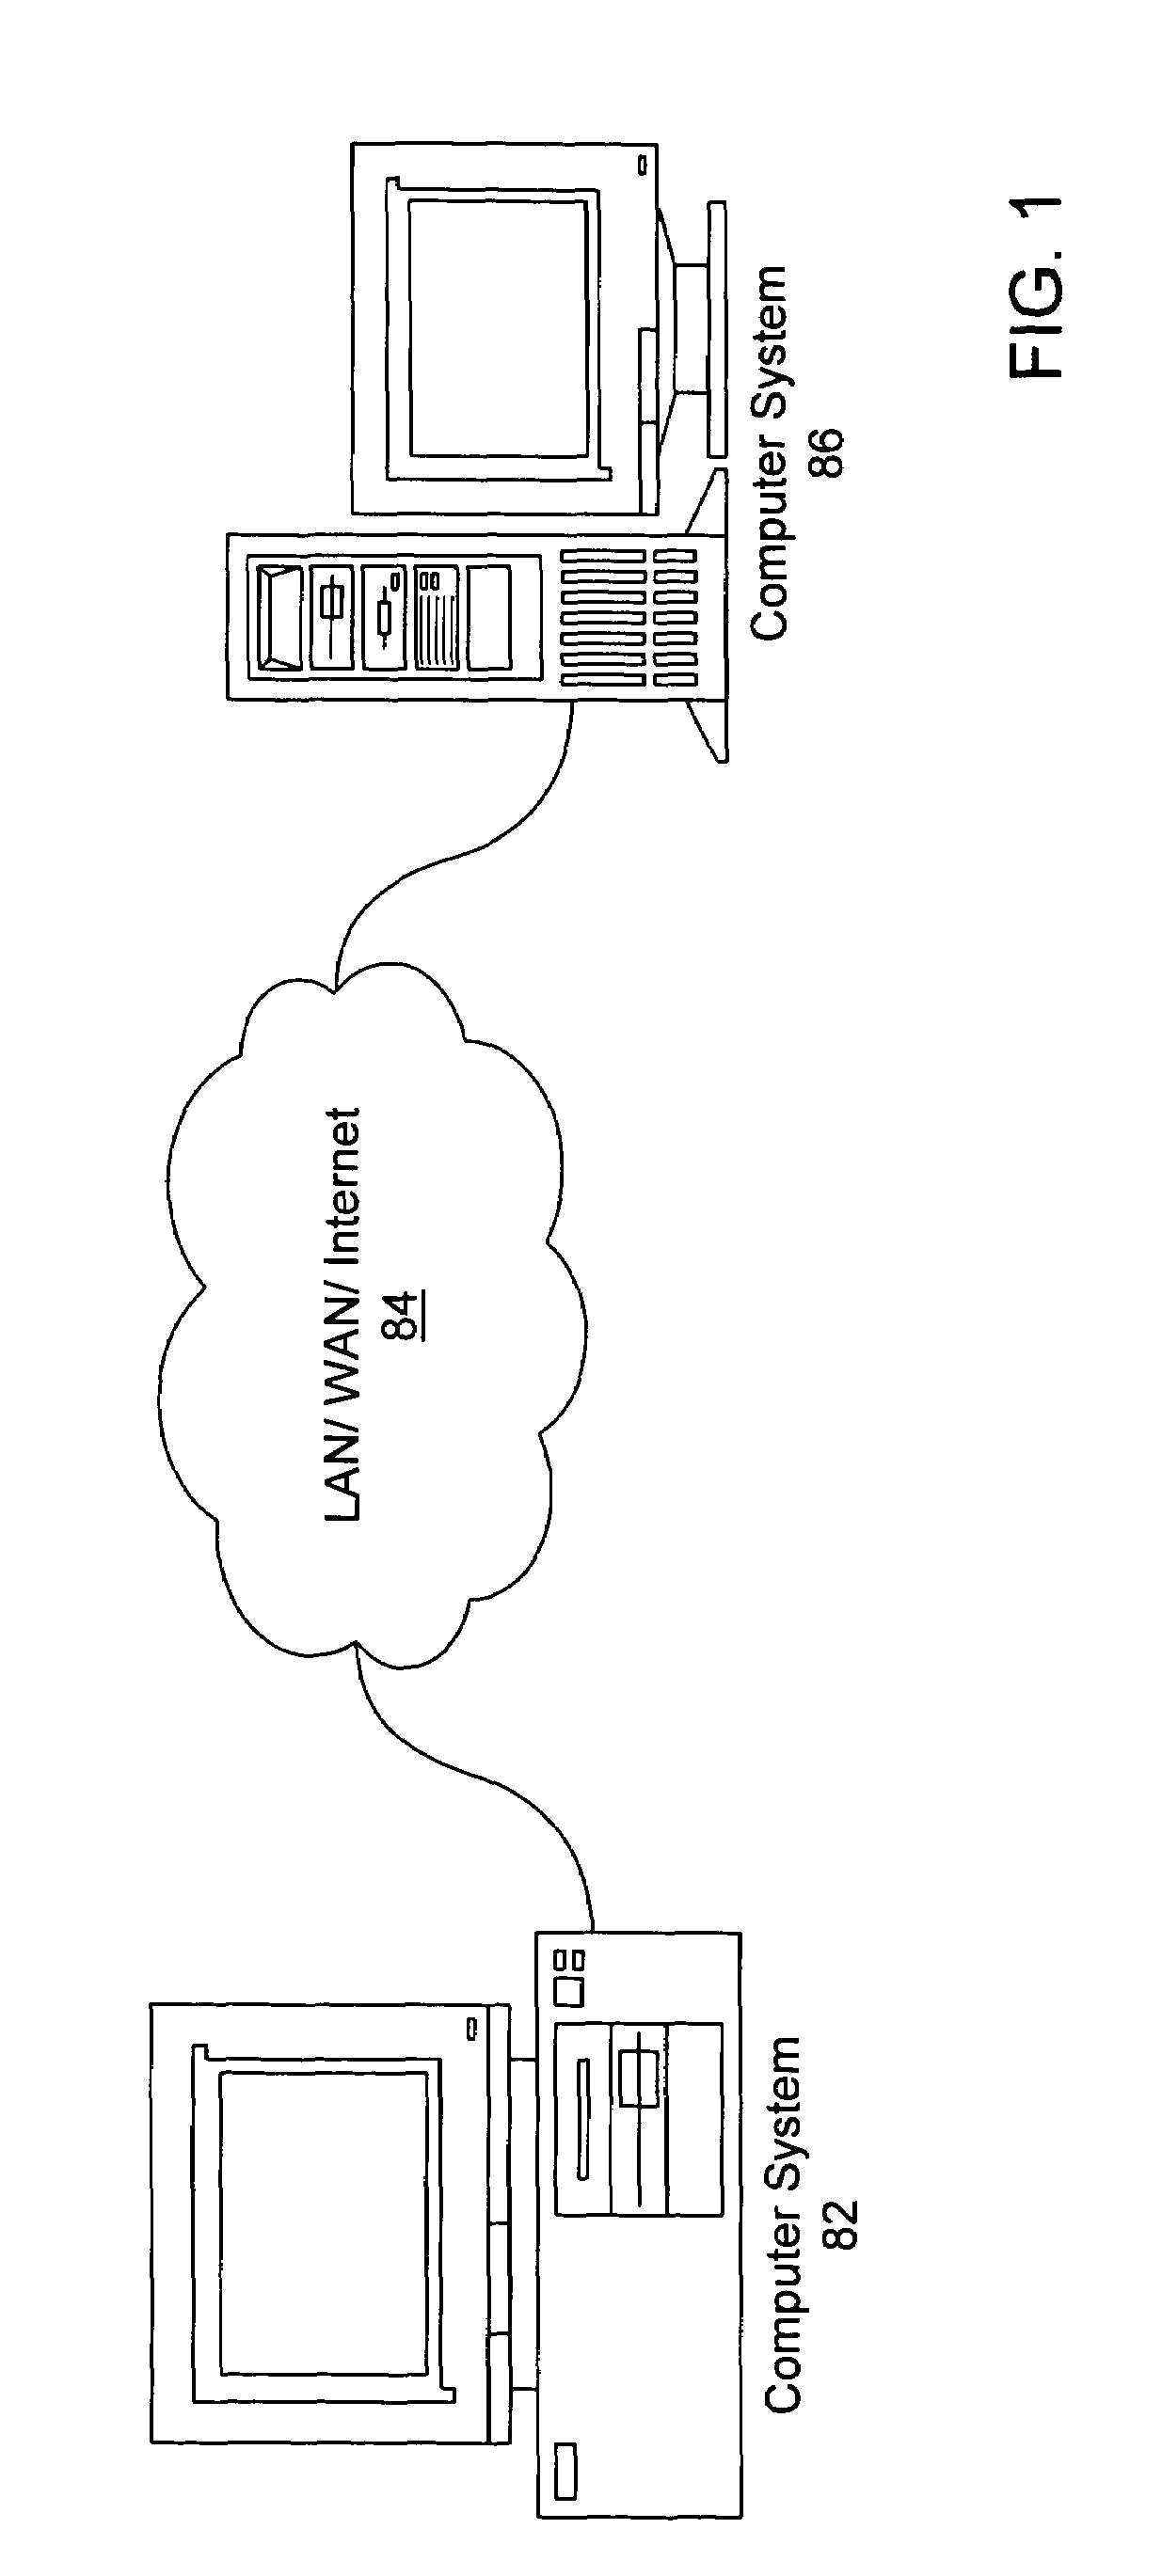 System and method for automatically creating a prototype to perform a process